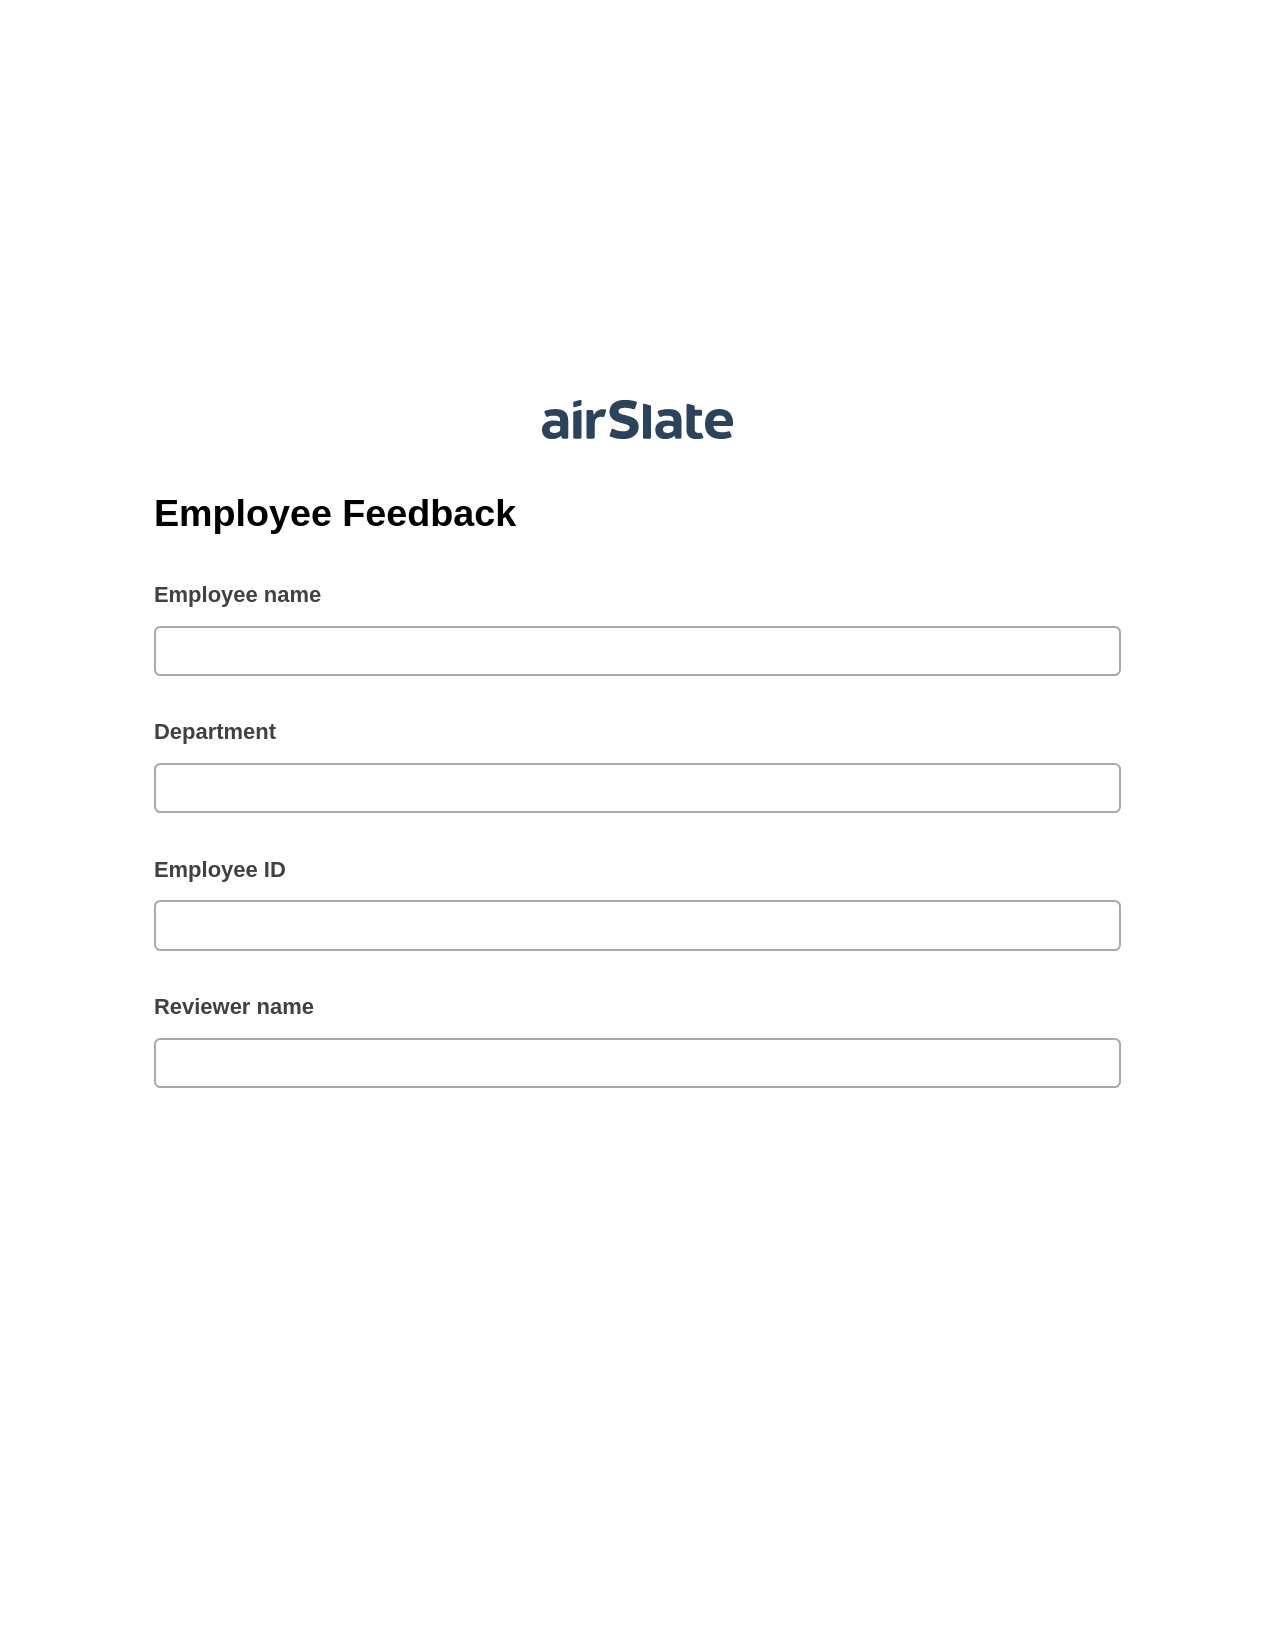 Multirole Employee Feedback Pre-fill Document Bot, Email Notification Bot, Archive to SharePoint Folder Bot